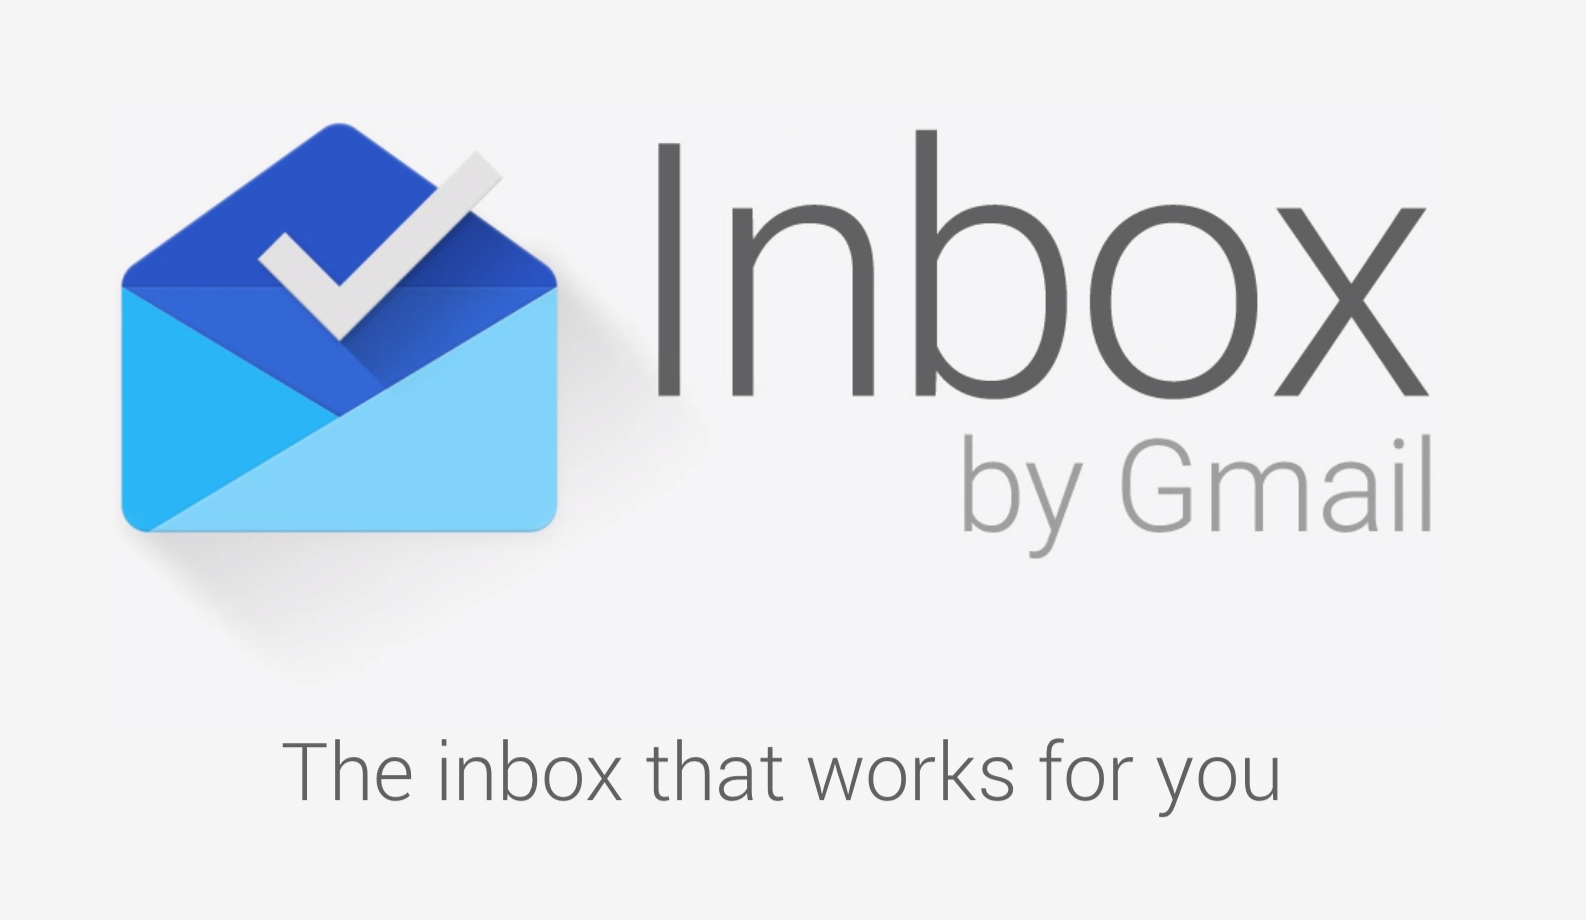 Thoughts on Google Inbox